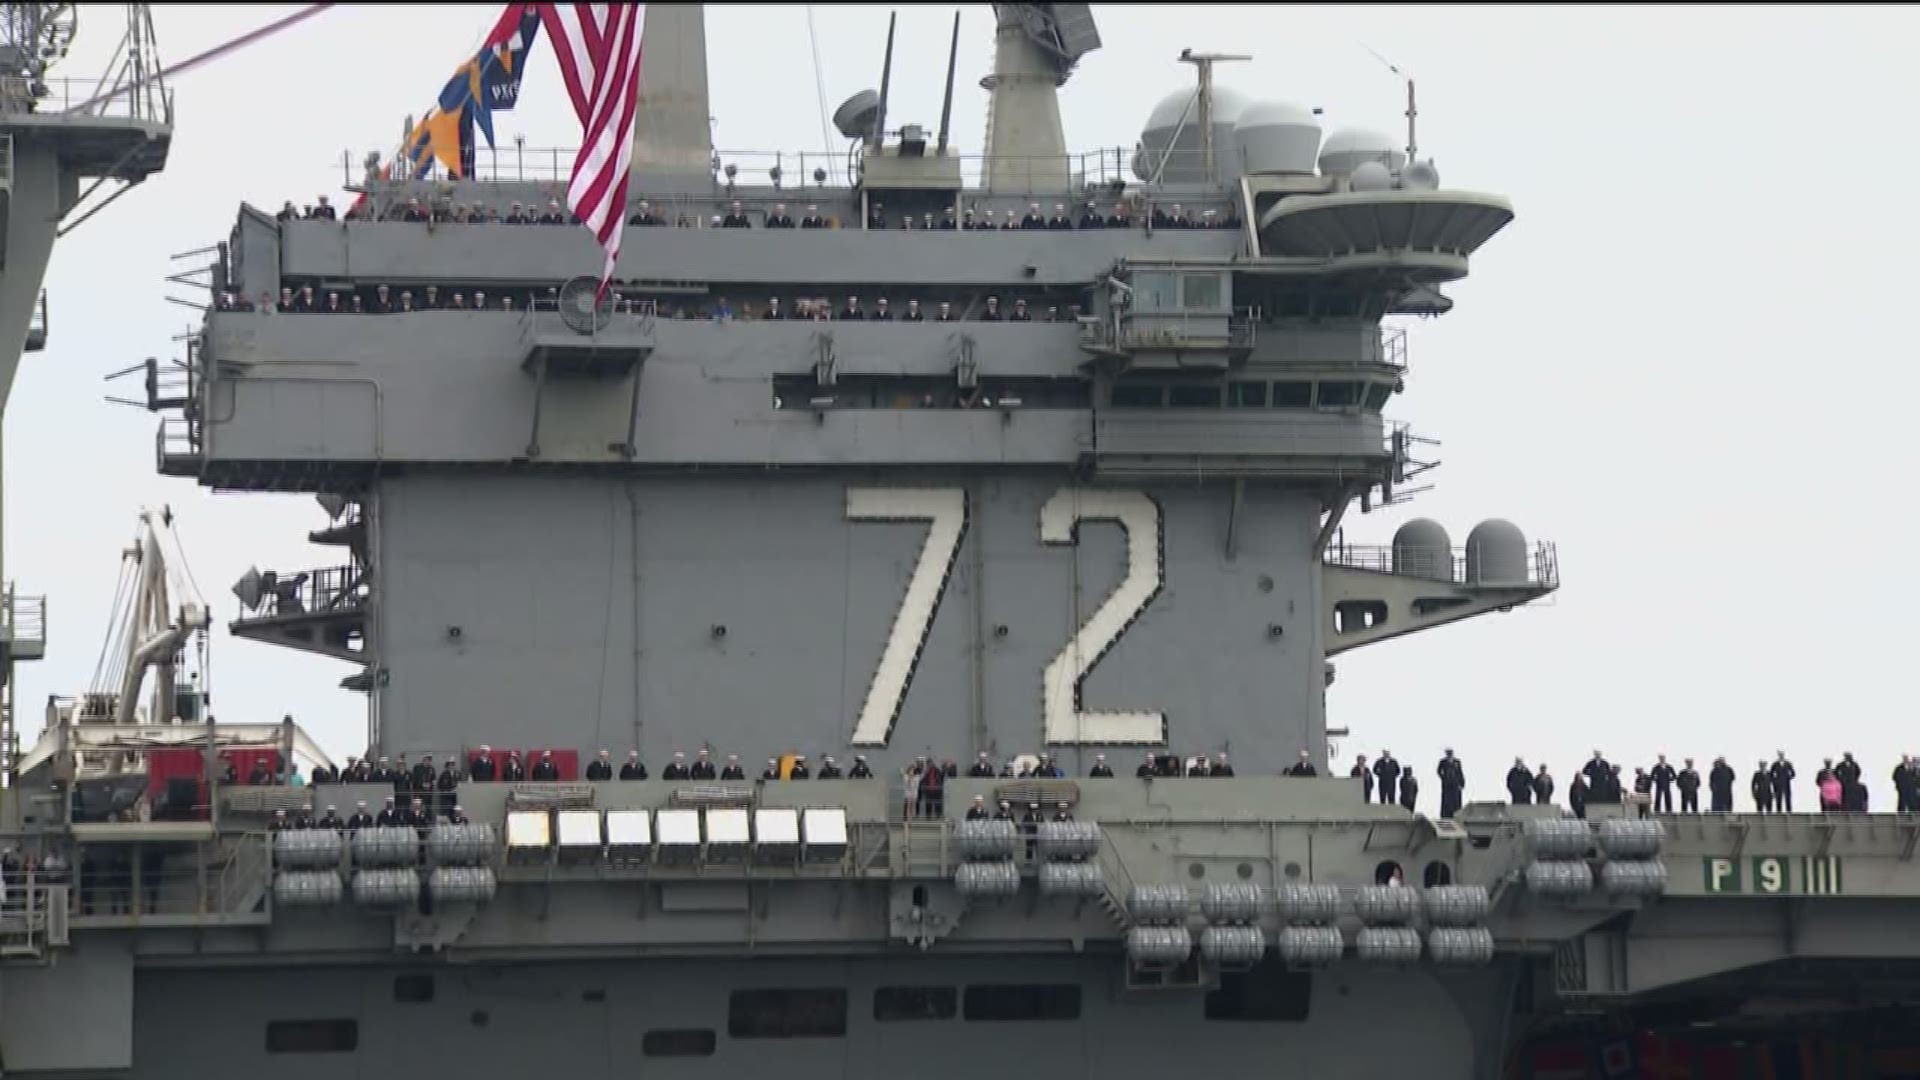 The U.S.S. Lincoln returned to the San Diego after 294 days at sea.